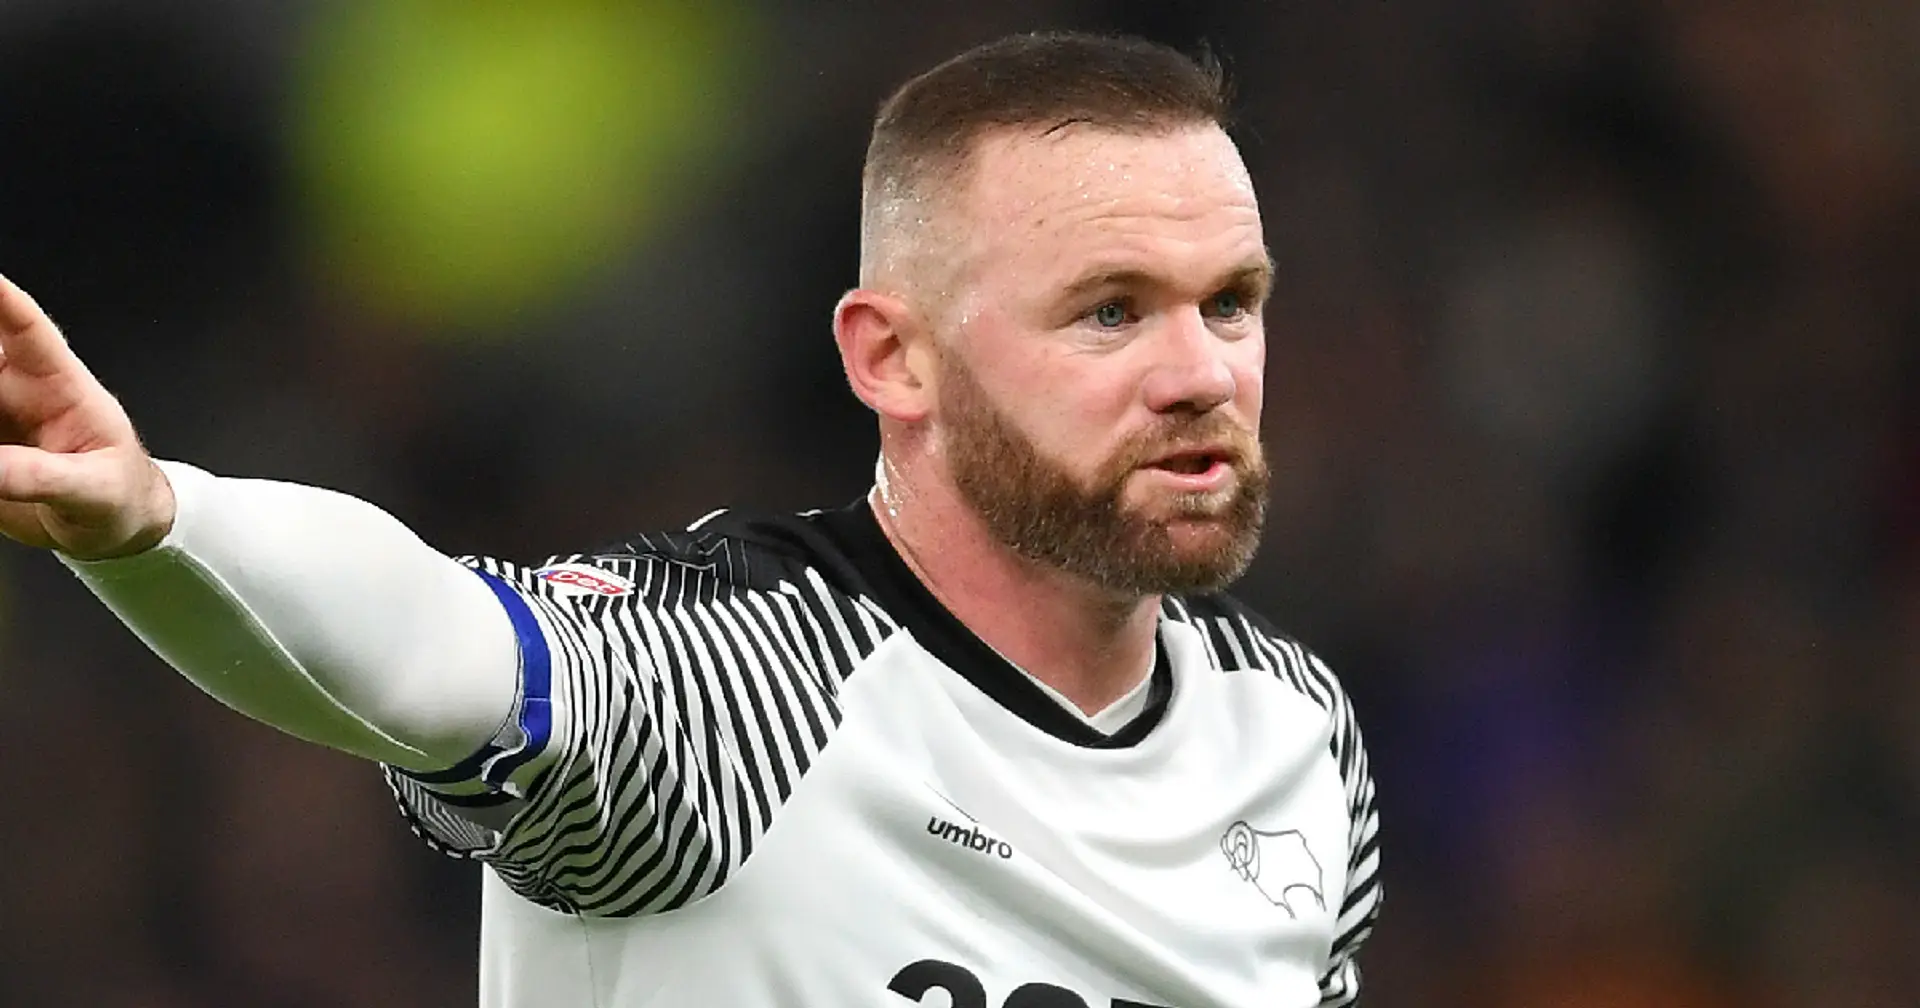 Wayne Rooney named interim Derby County boss after Phillip Cocu sacking 